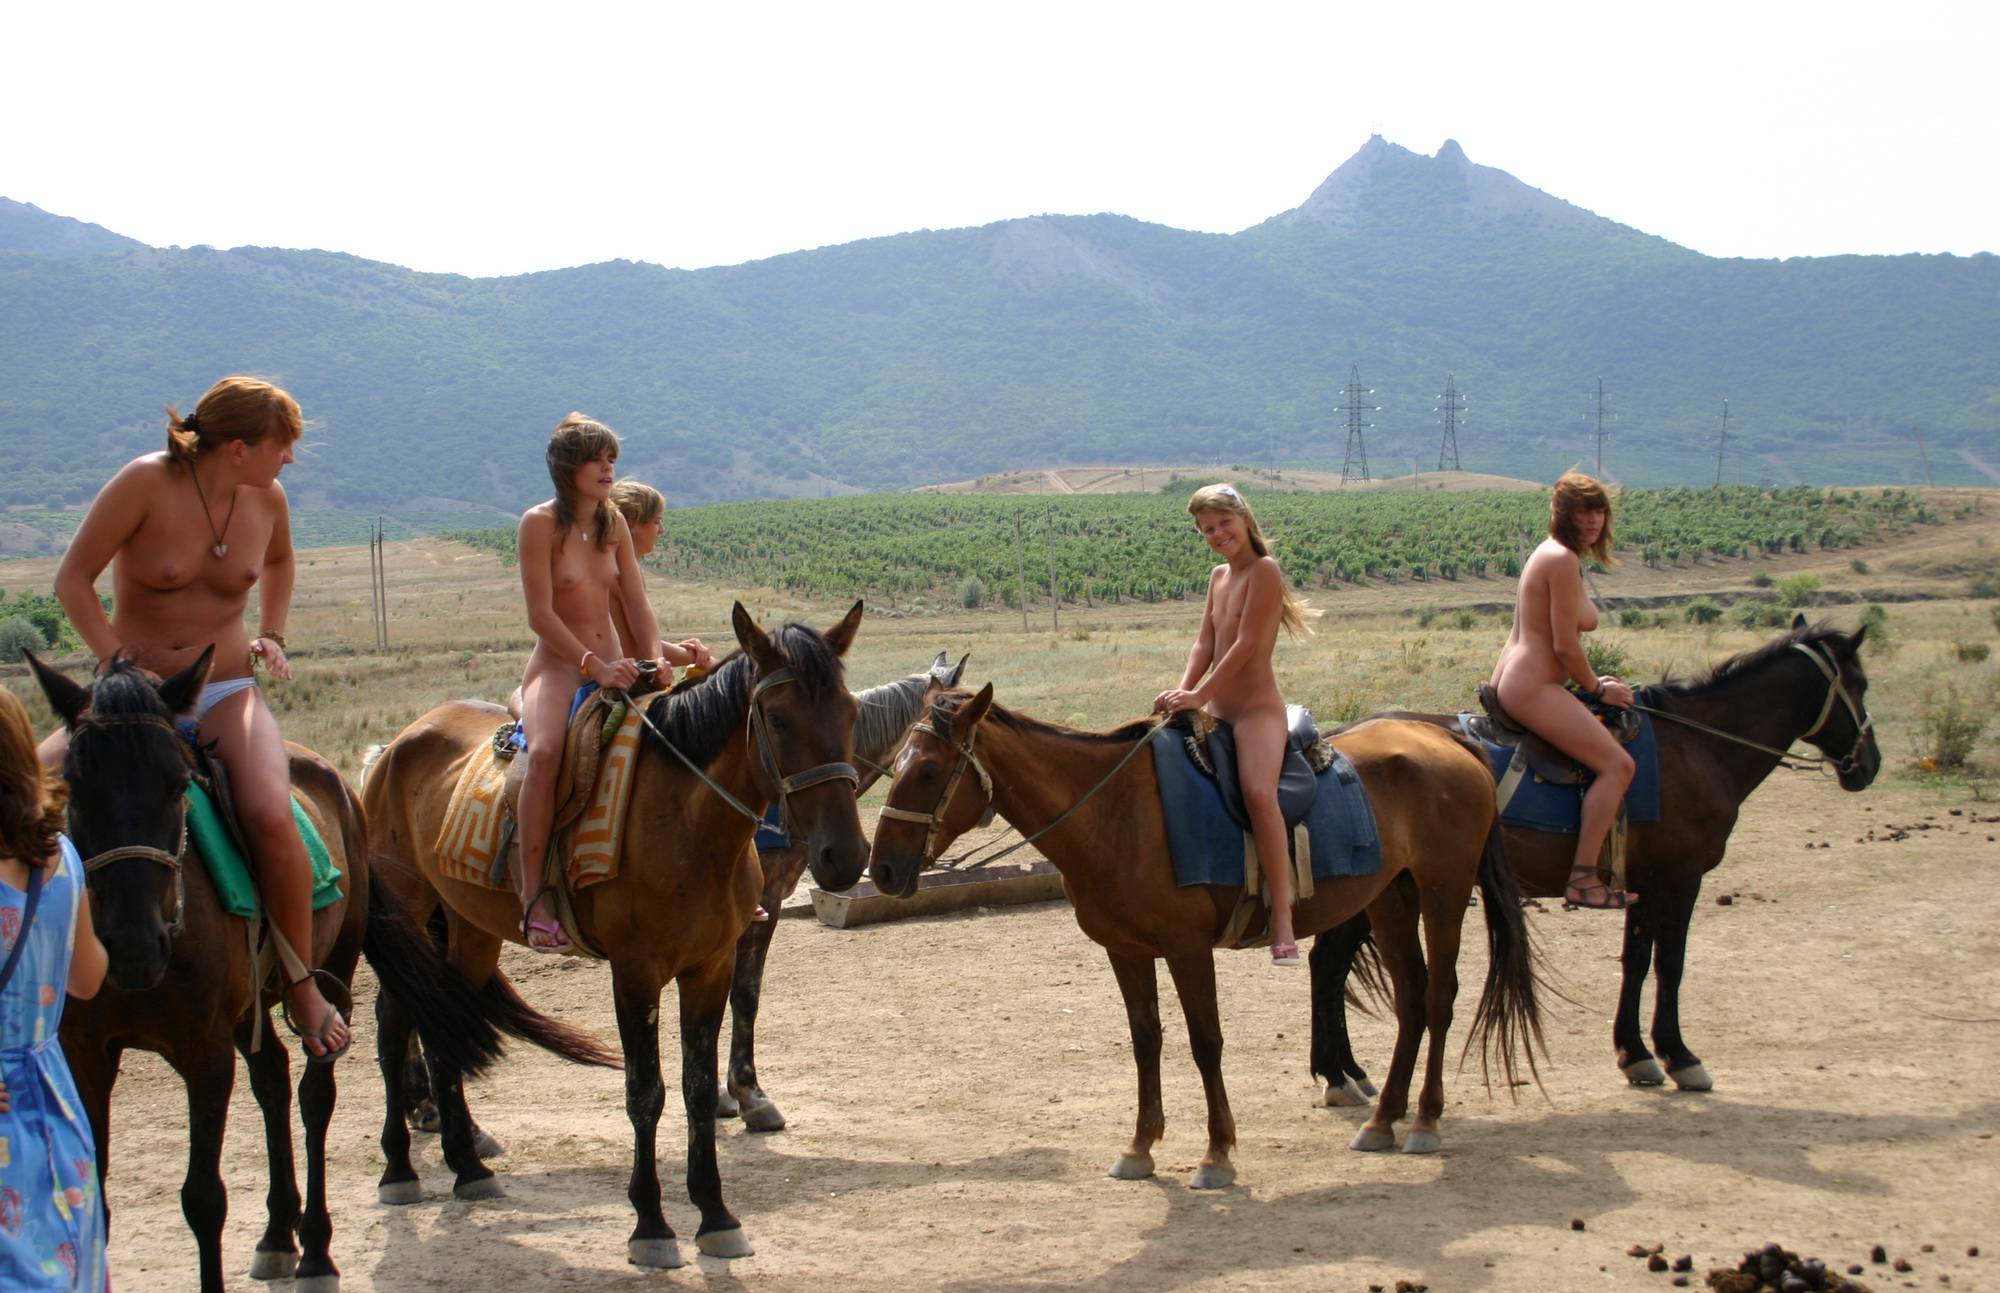 Pure Nudism Photos-Waiting for the Horserides - 2